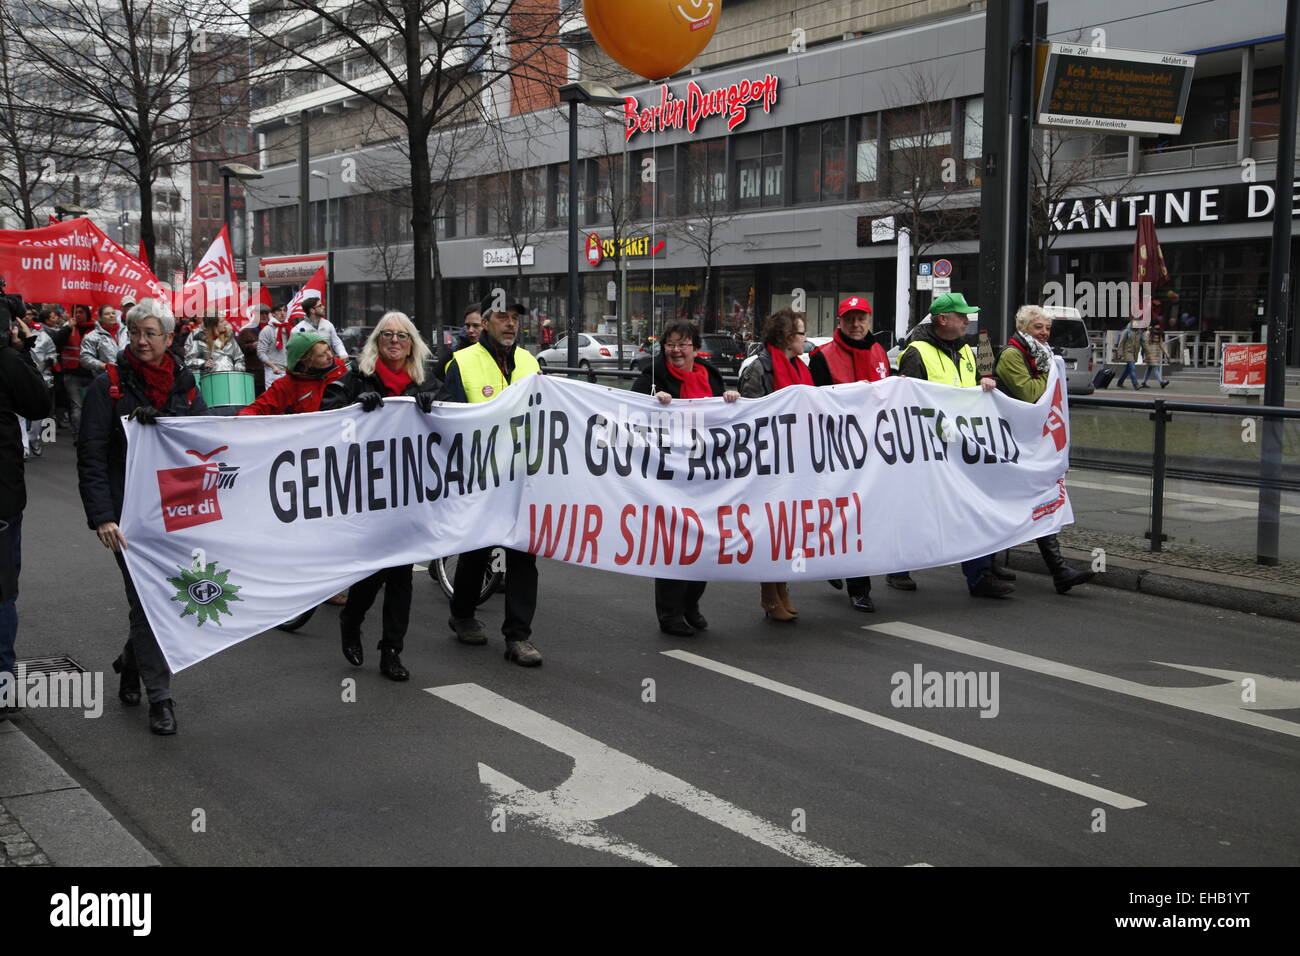 Berlin, Germany. 11th Mar, 2015. GEW (Union Education and Science) Warning strike for higher wages and against deterioration pension in Berlin on March 11, 2015 in Germany. Credit:  Stefan Papp/Alamy Live News Stock Photo